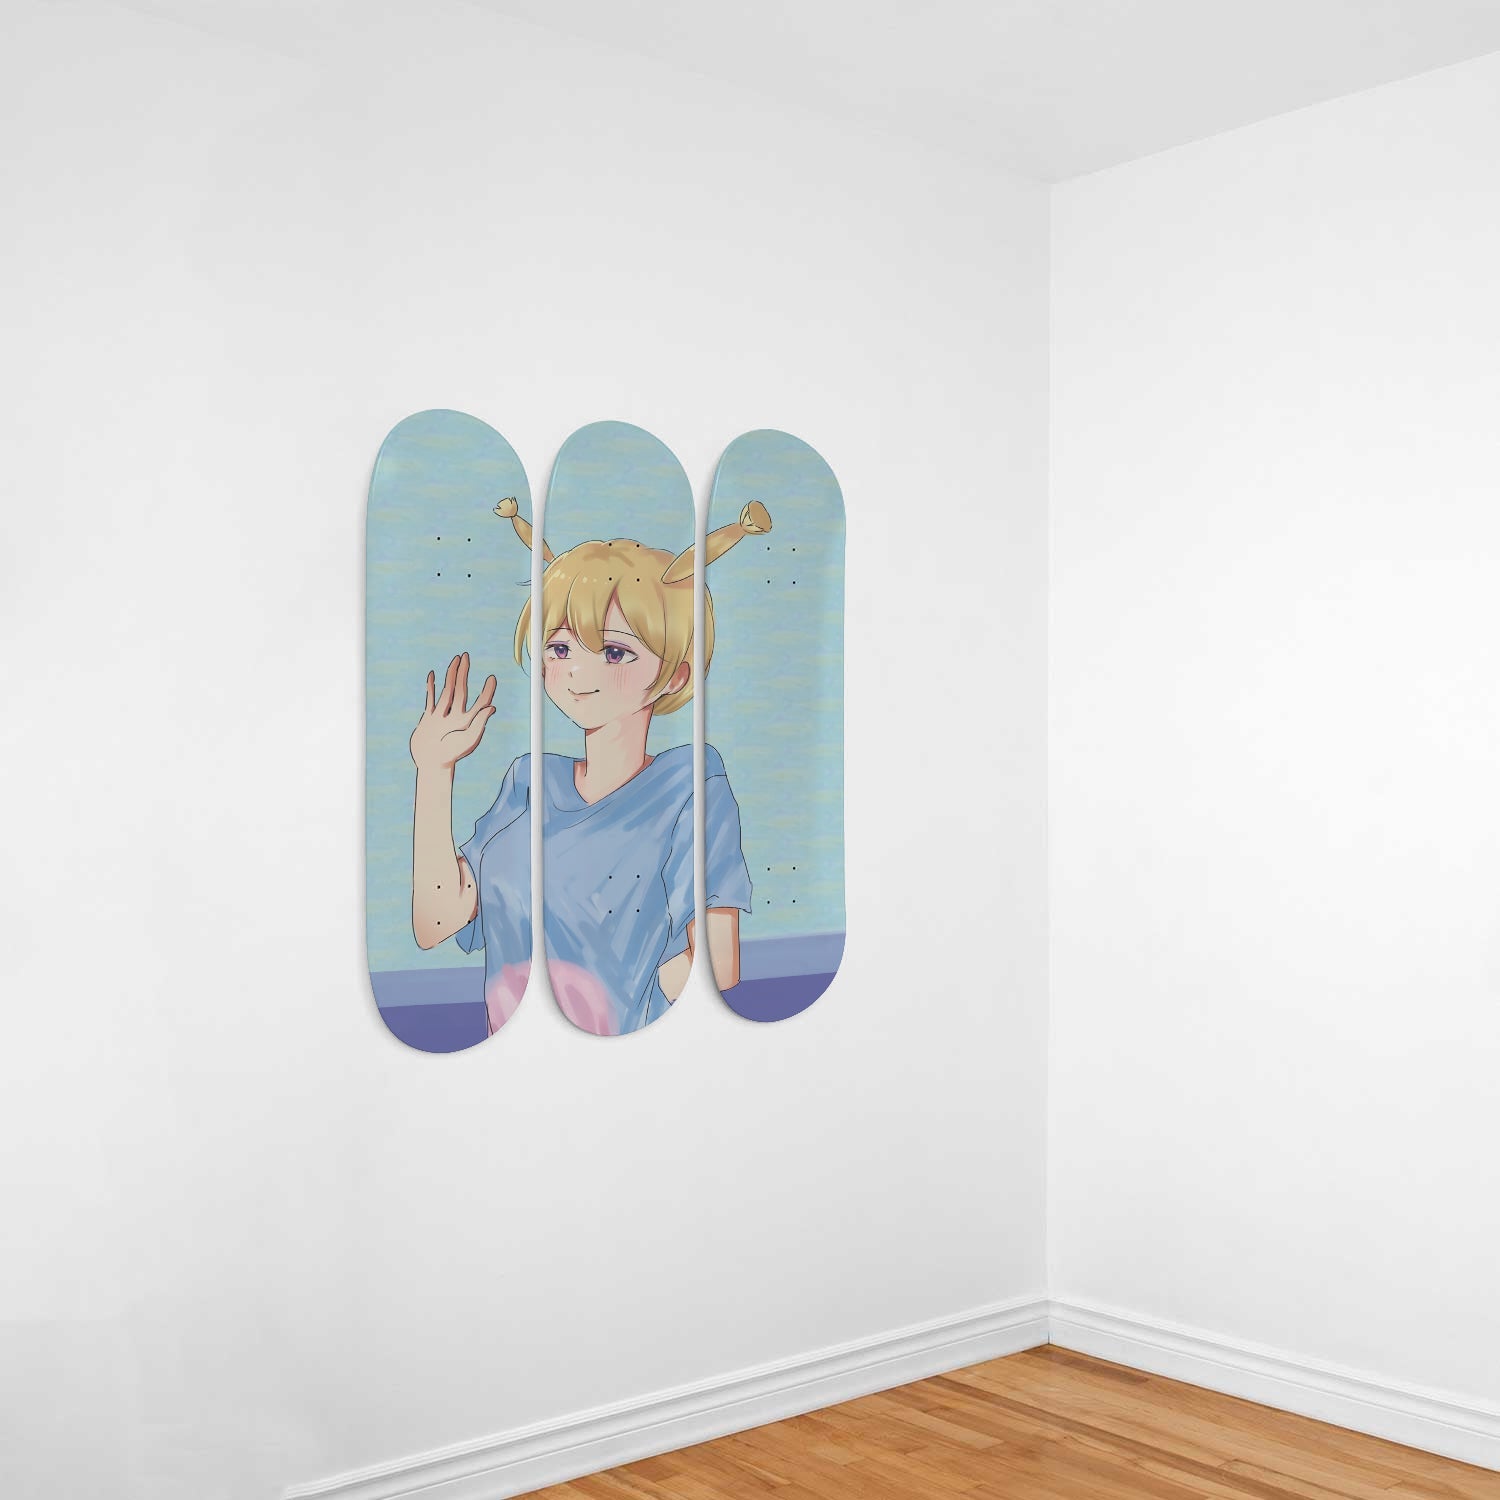 Commission by Vic #2.0 - Skater Wall